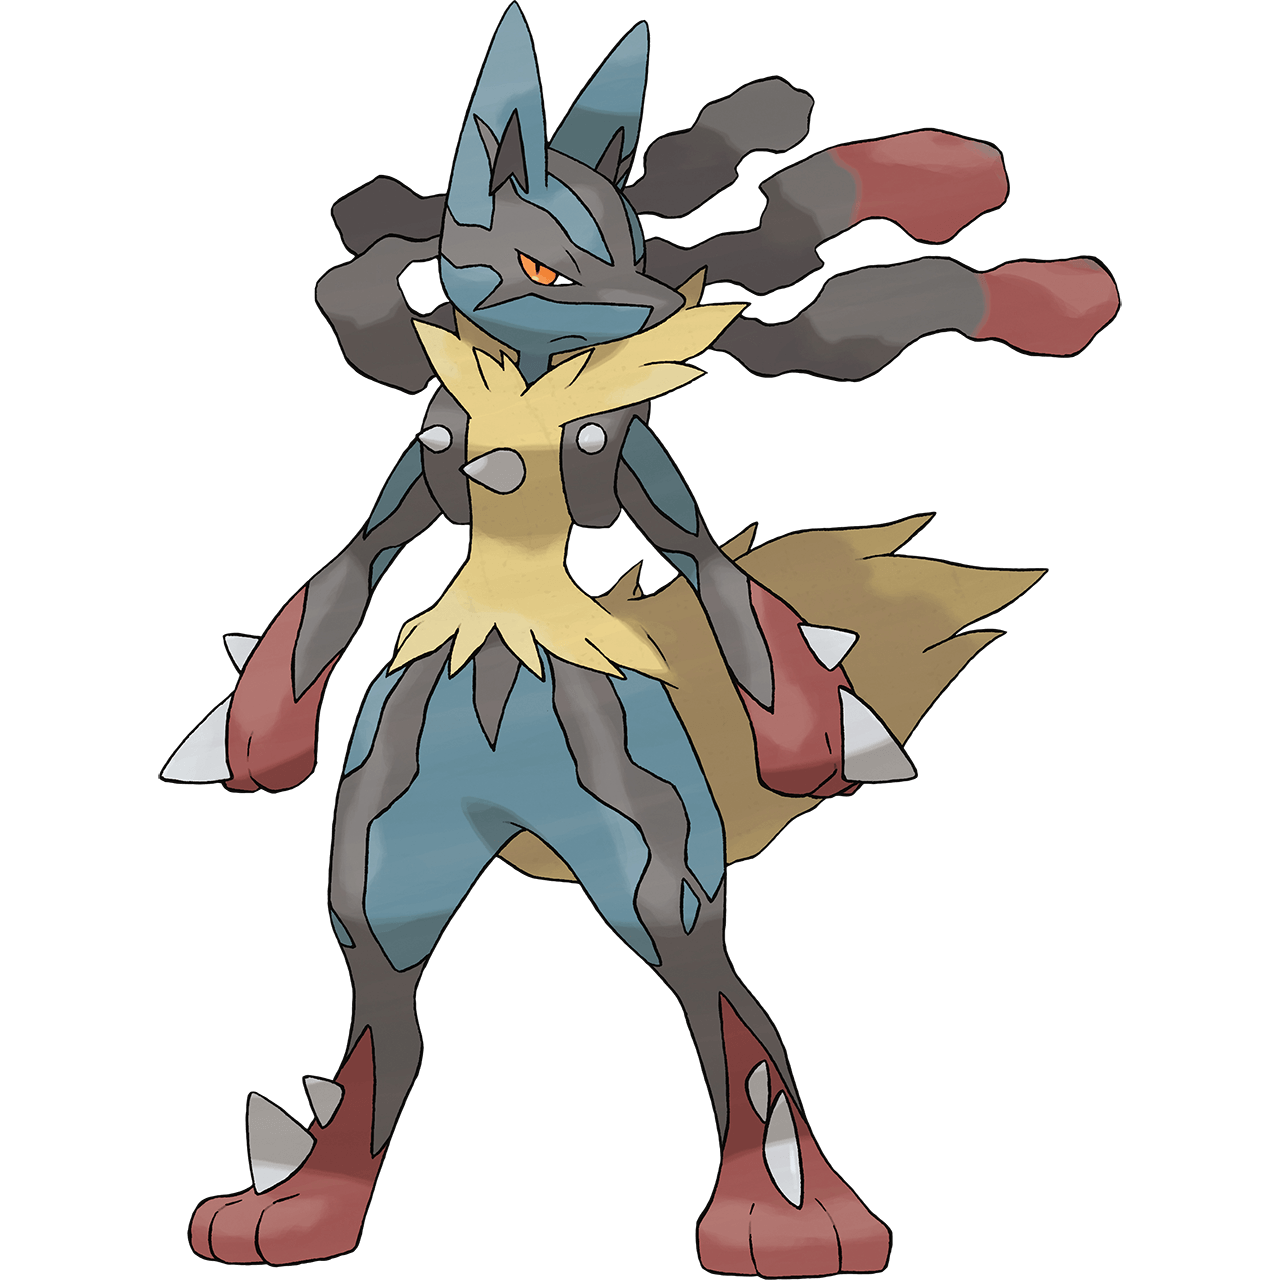 Can Lucario be shiny in Pokemon GO?